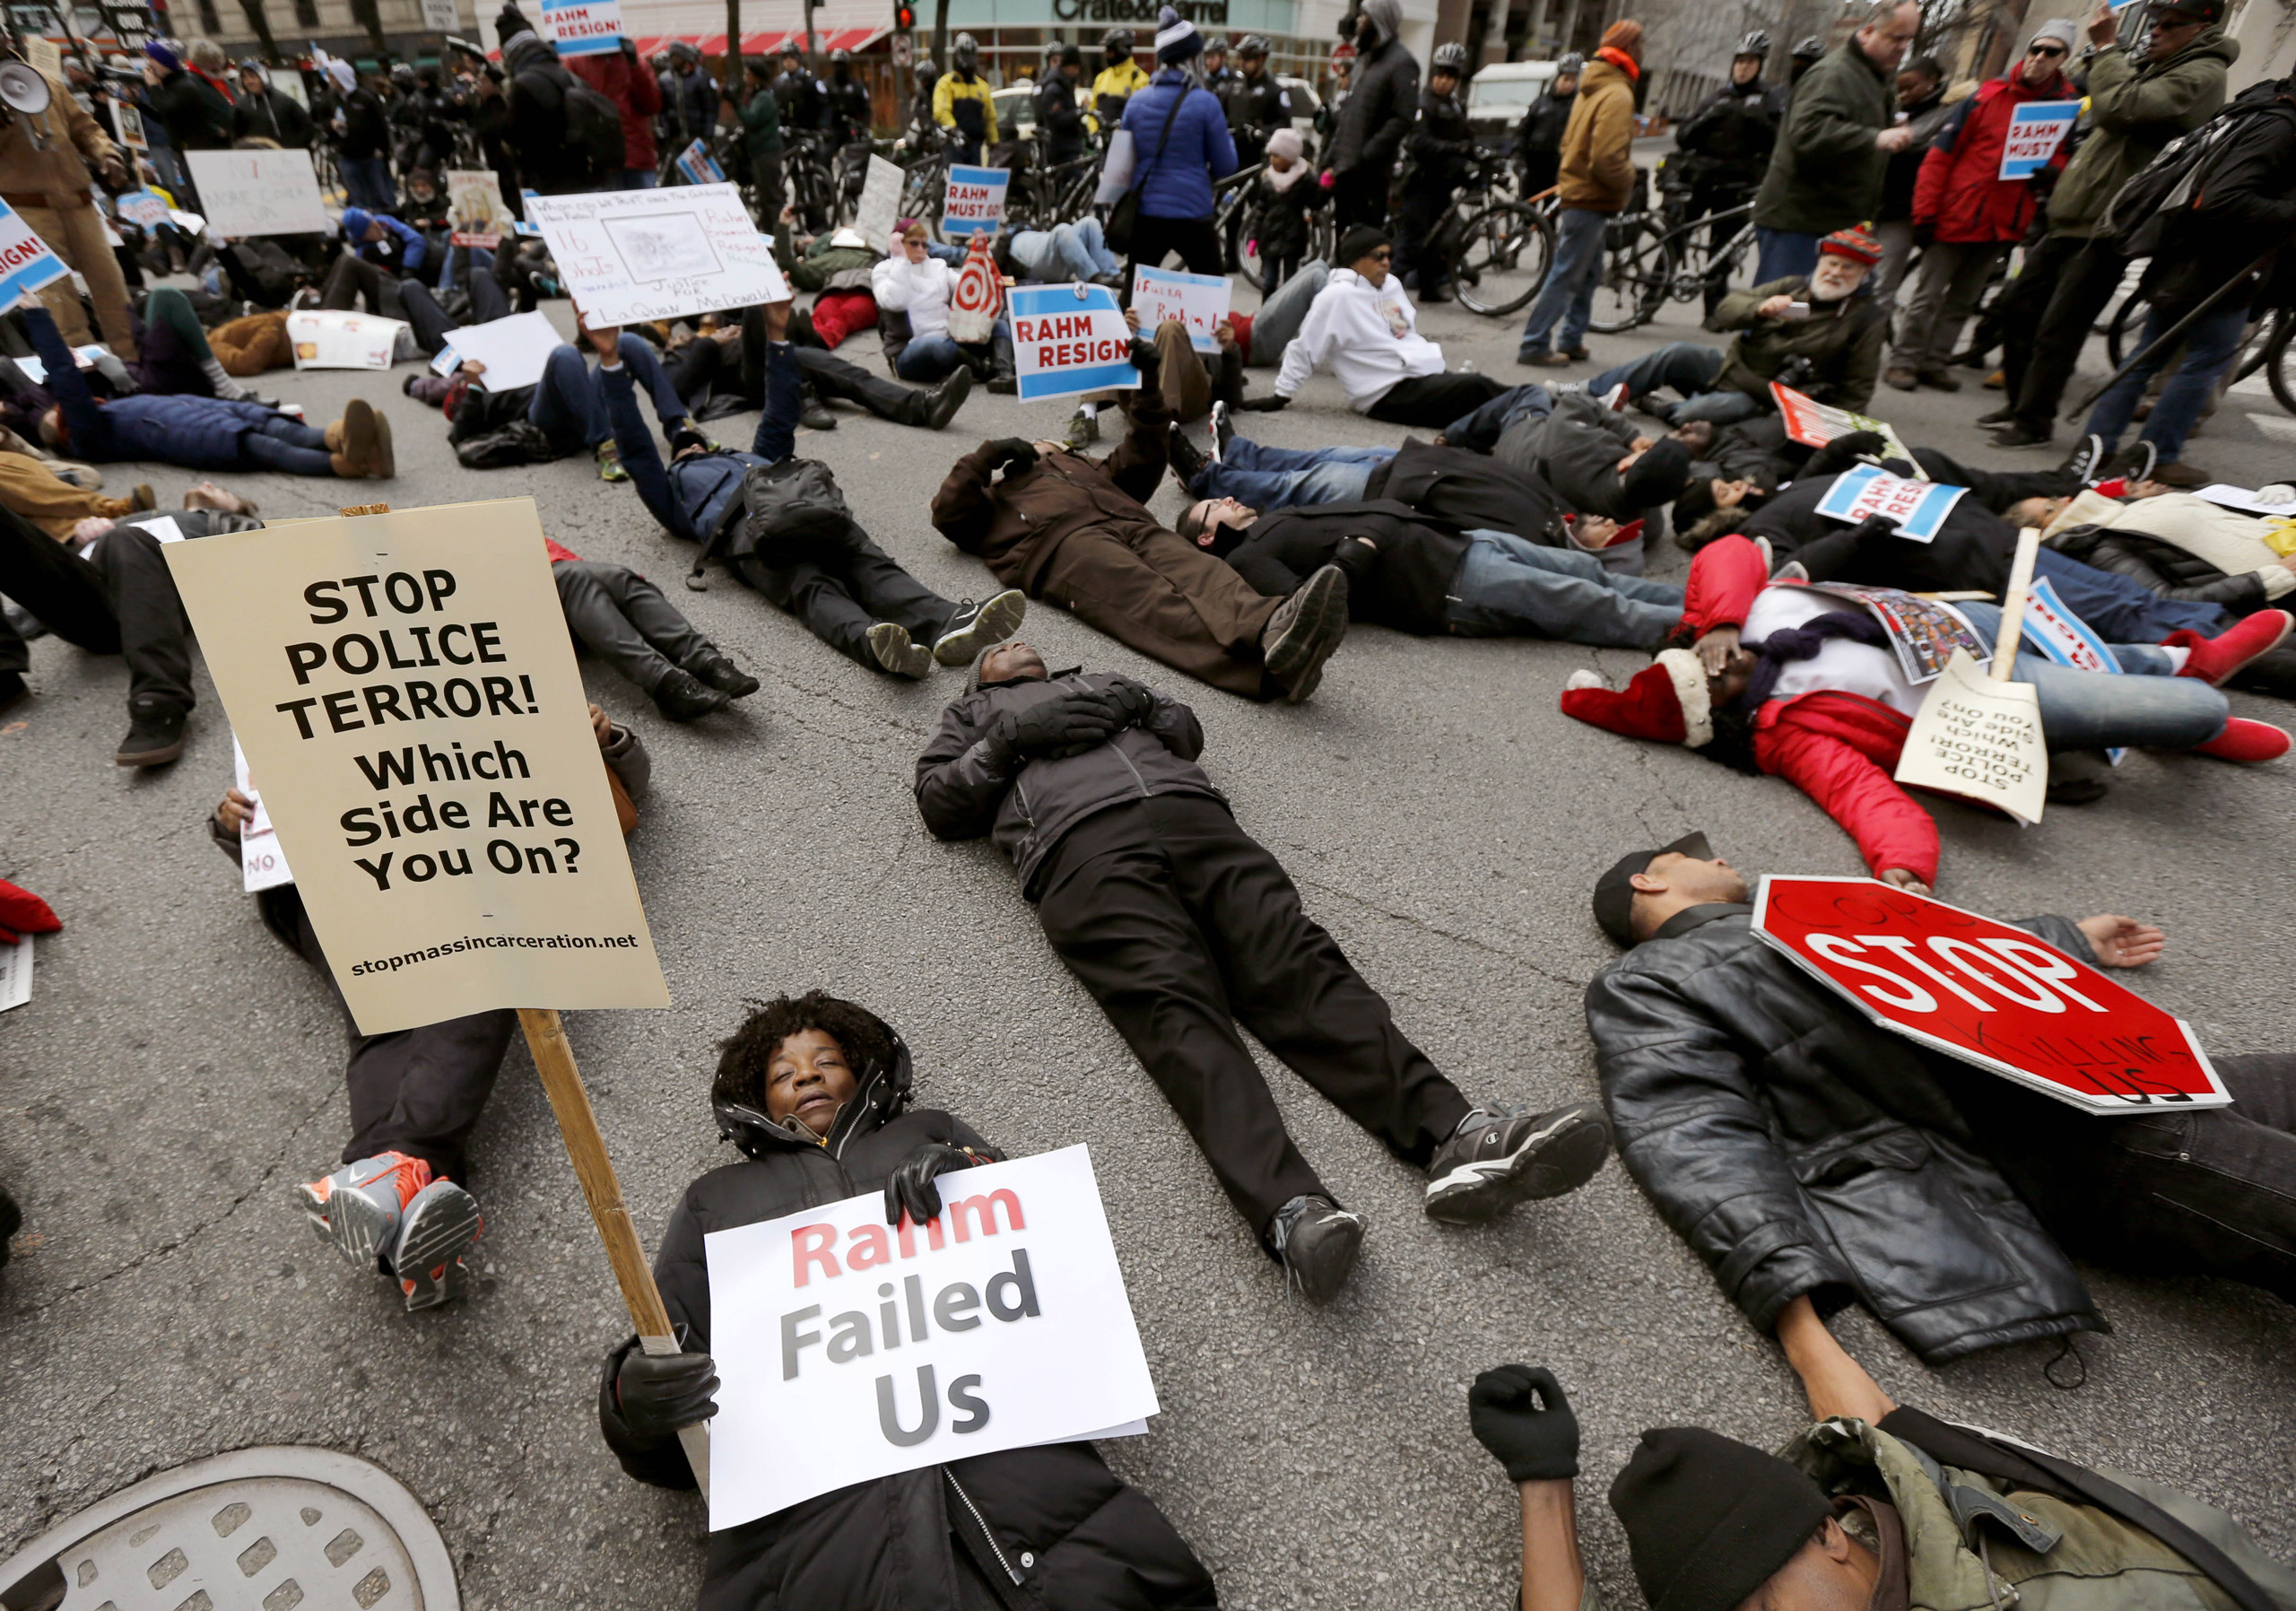 Protesters block an intersection on Chicago's Magnificent Mile, calling for the resignation of Mayor Rahm Emanuel, Thursday, Dec. 24, 2015, in Chicago. The Christmas Eve protest is the latest in a series of demonstrations in the city since the release last month of police video showing a white officer shooting a black teenager 16 times. (AP Photo/Charles Rex Arbogast)